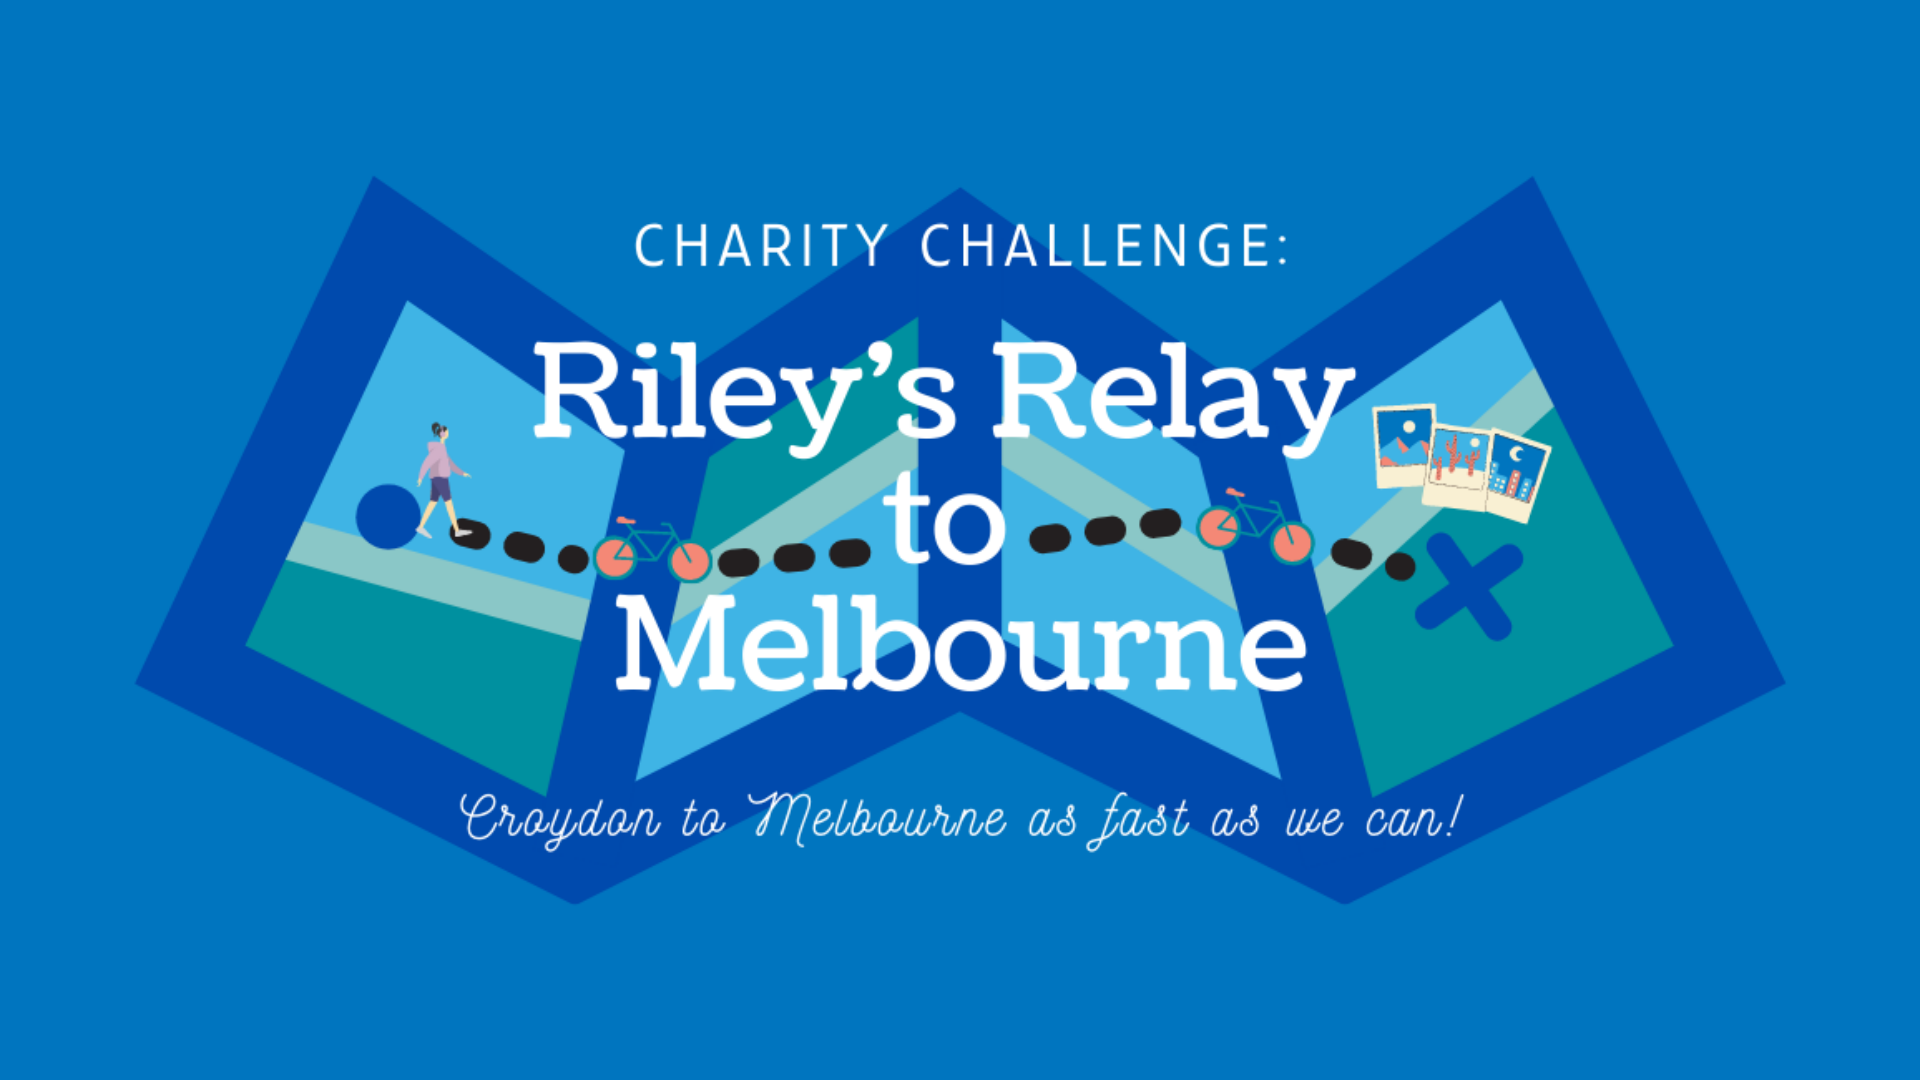 Charity Challenge: Riley’s Relay to Melbourne